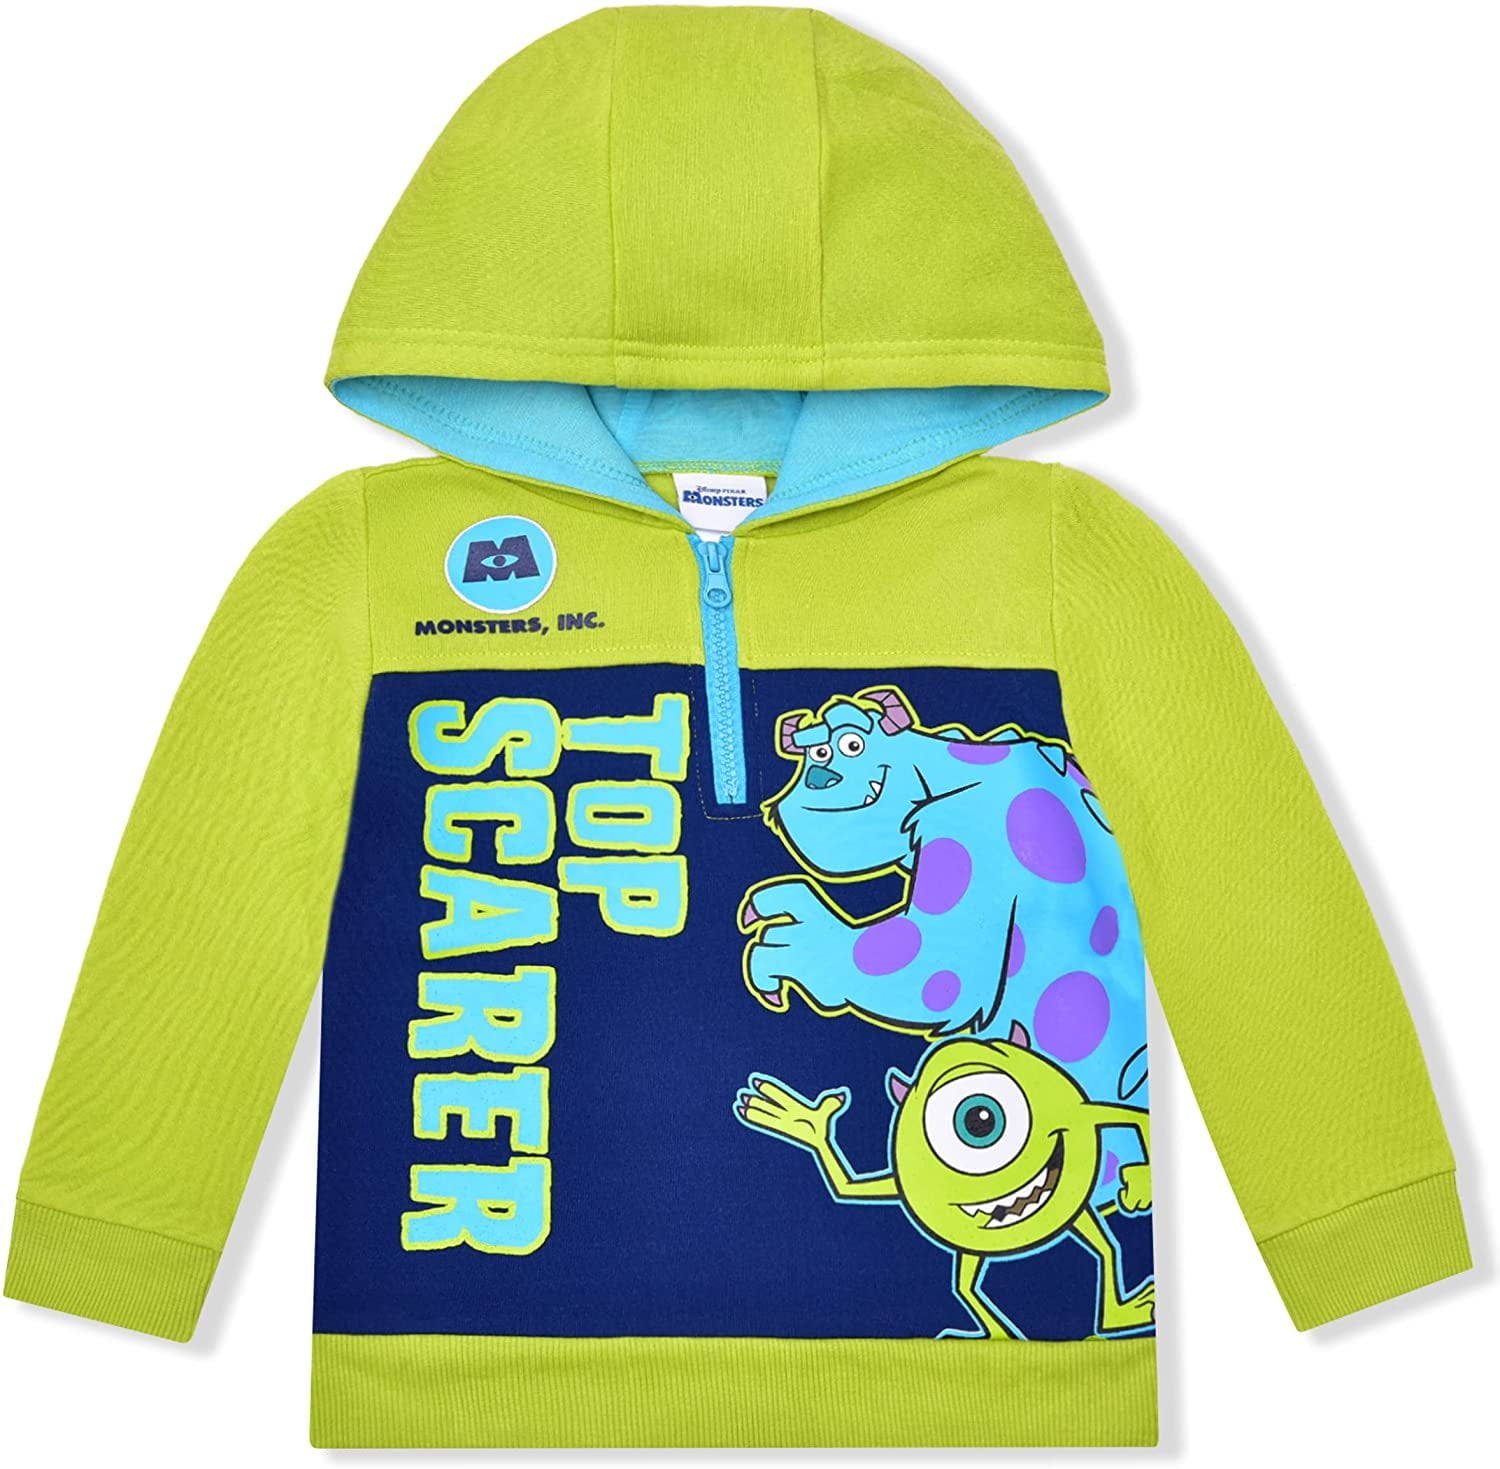  Disney and PIXAR's Monsters, Inc. Video Game Scare Squad  Sweatshirt : Clothing, Shoes & Jewelry